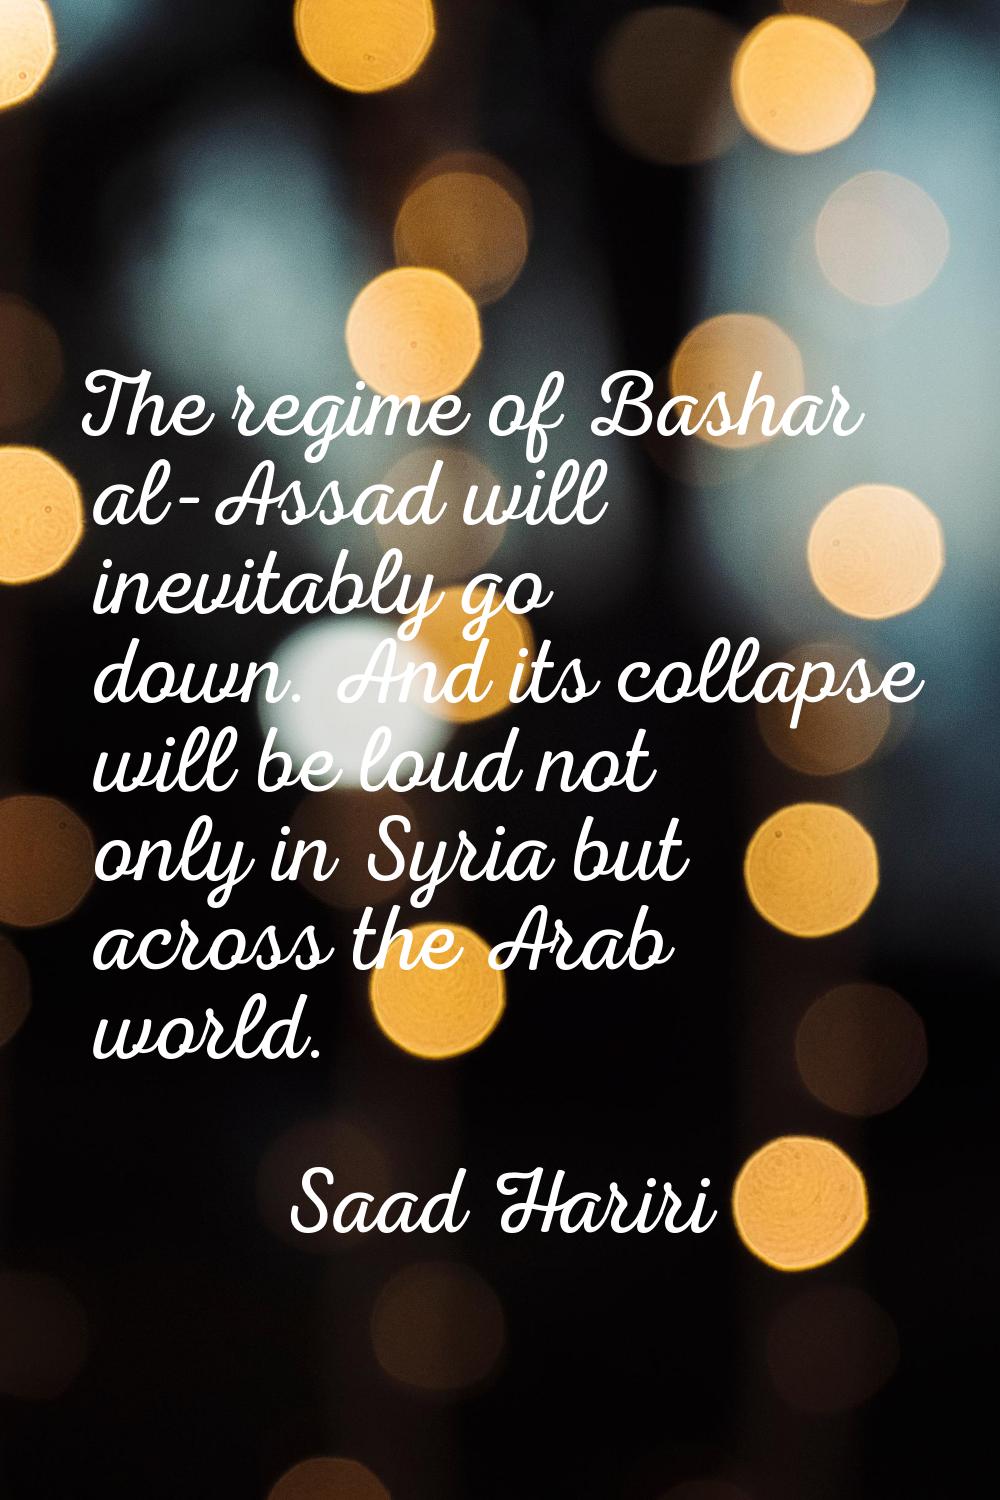 The regime of Bashar al-Assad will inevitably go down. And its collapse will be loud not only in Sy